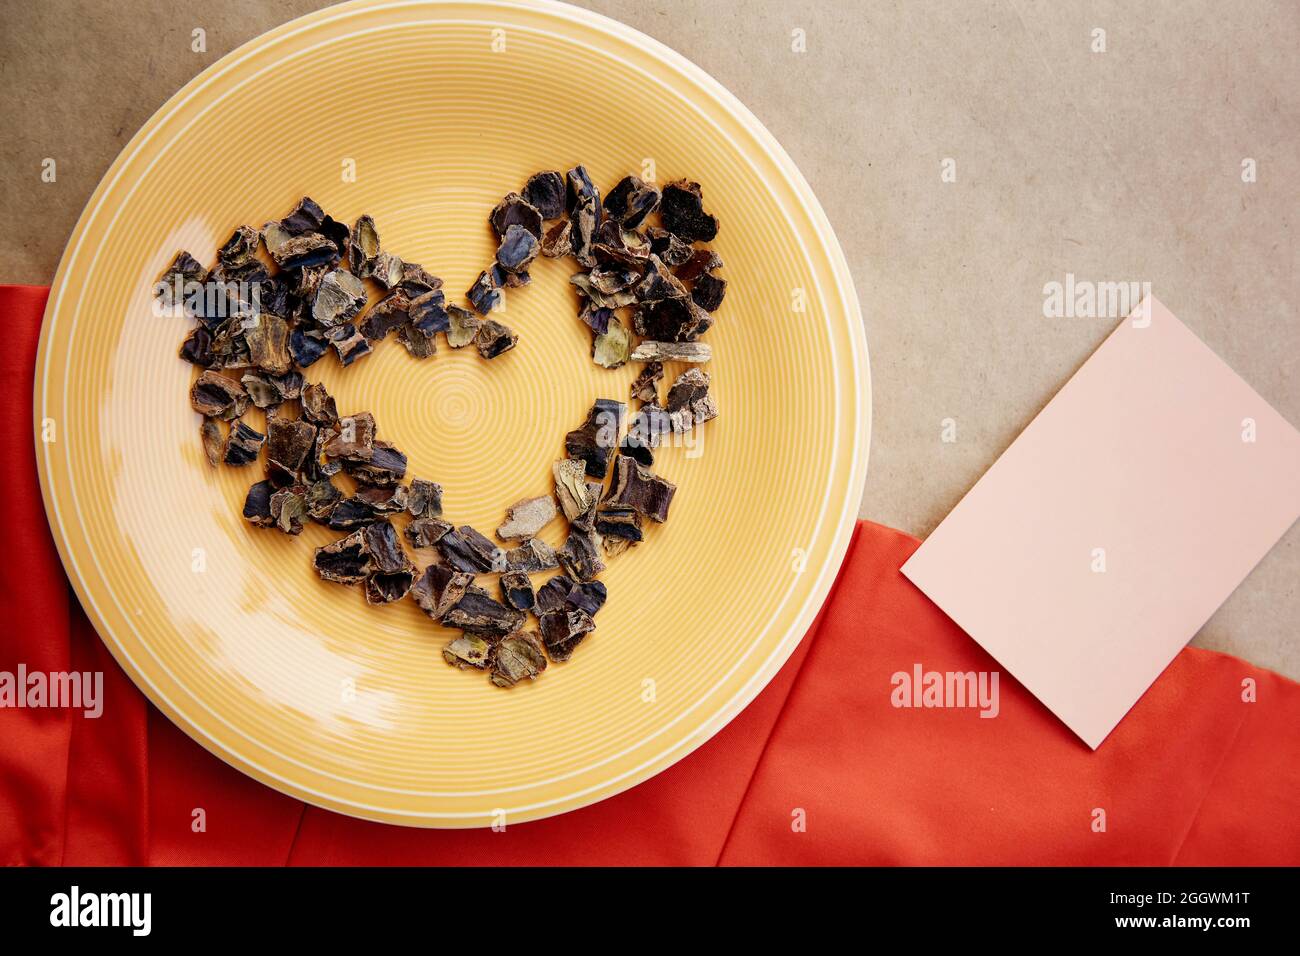 Carob in shape of heart symbol of coffee alternative - natural product on the plate. Organic plant-based caffeine antioxidants. Mock up of business ca Stock Photo